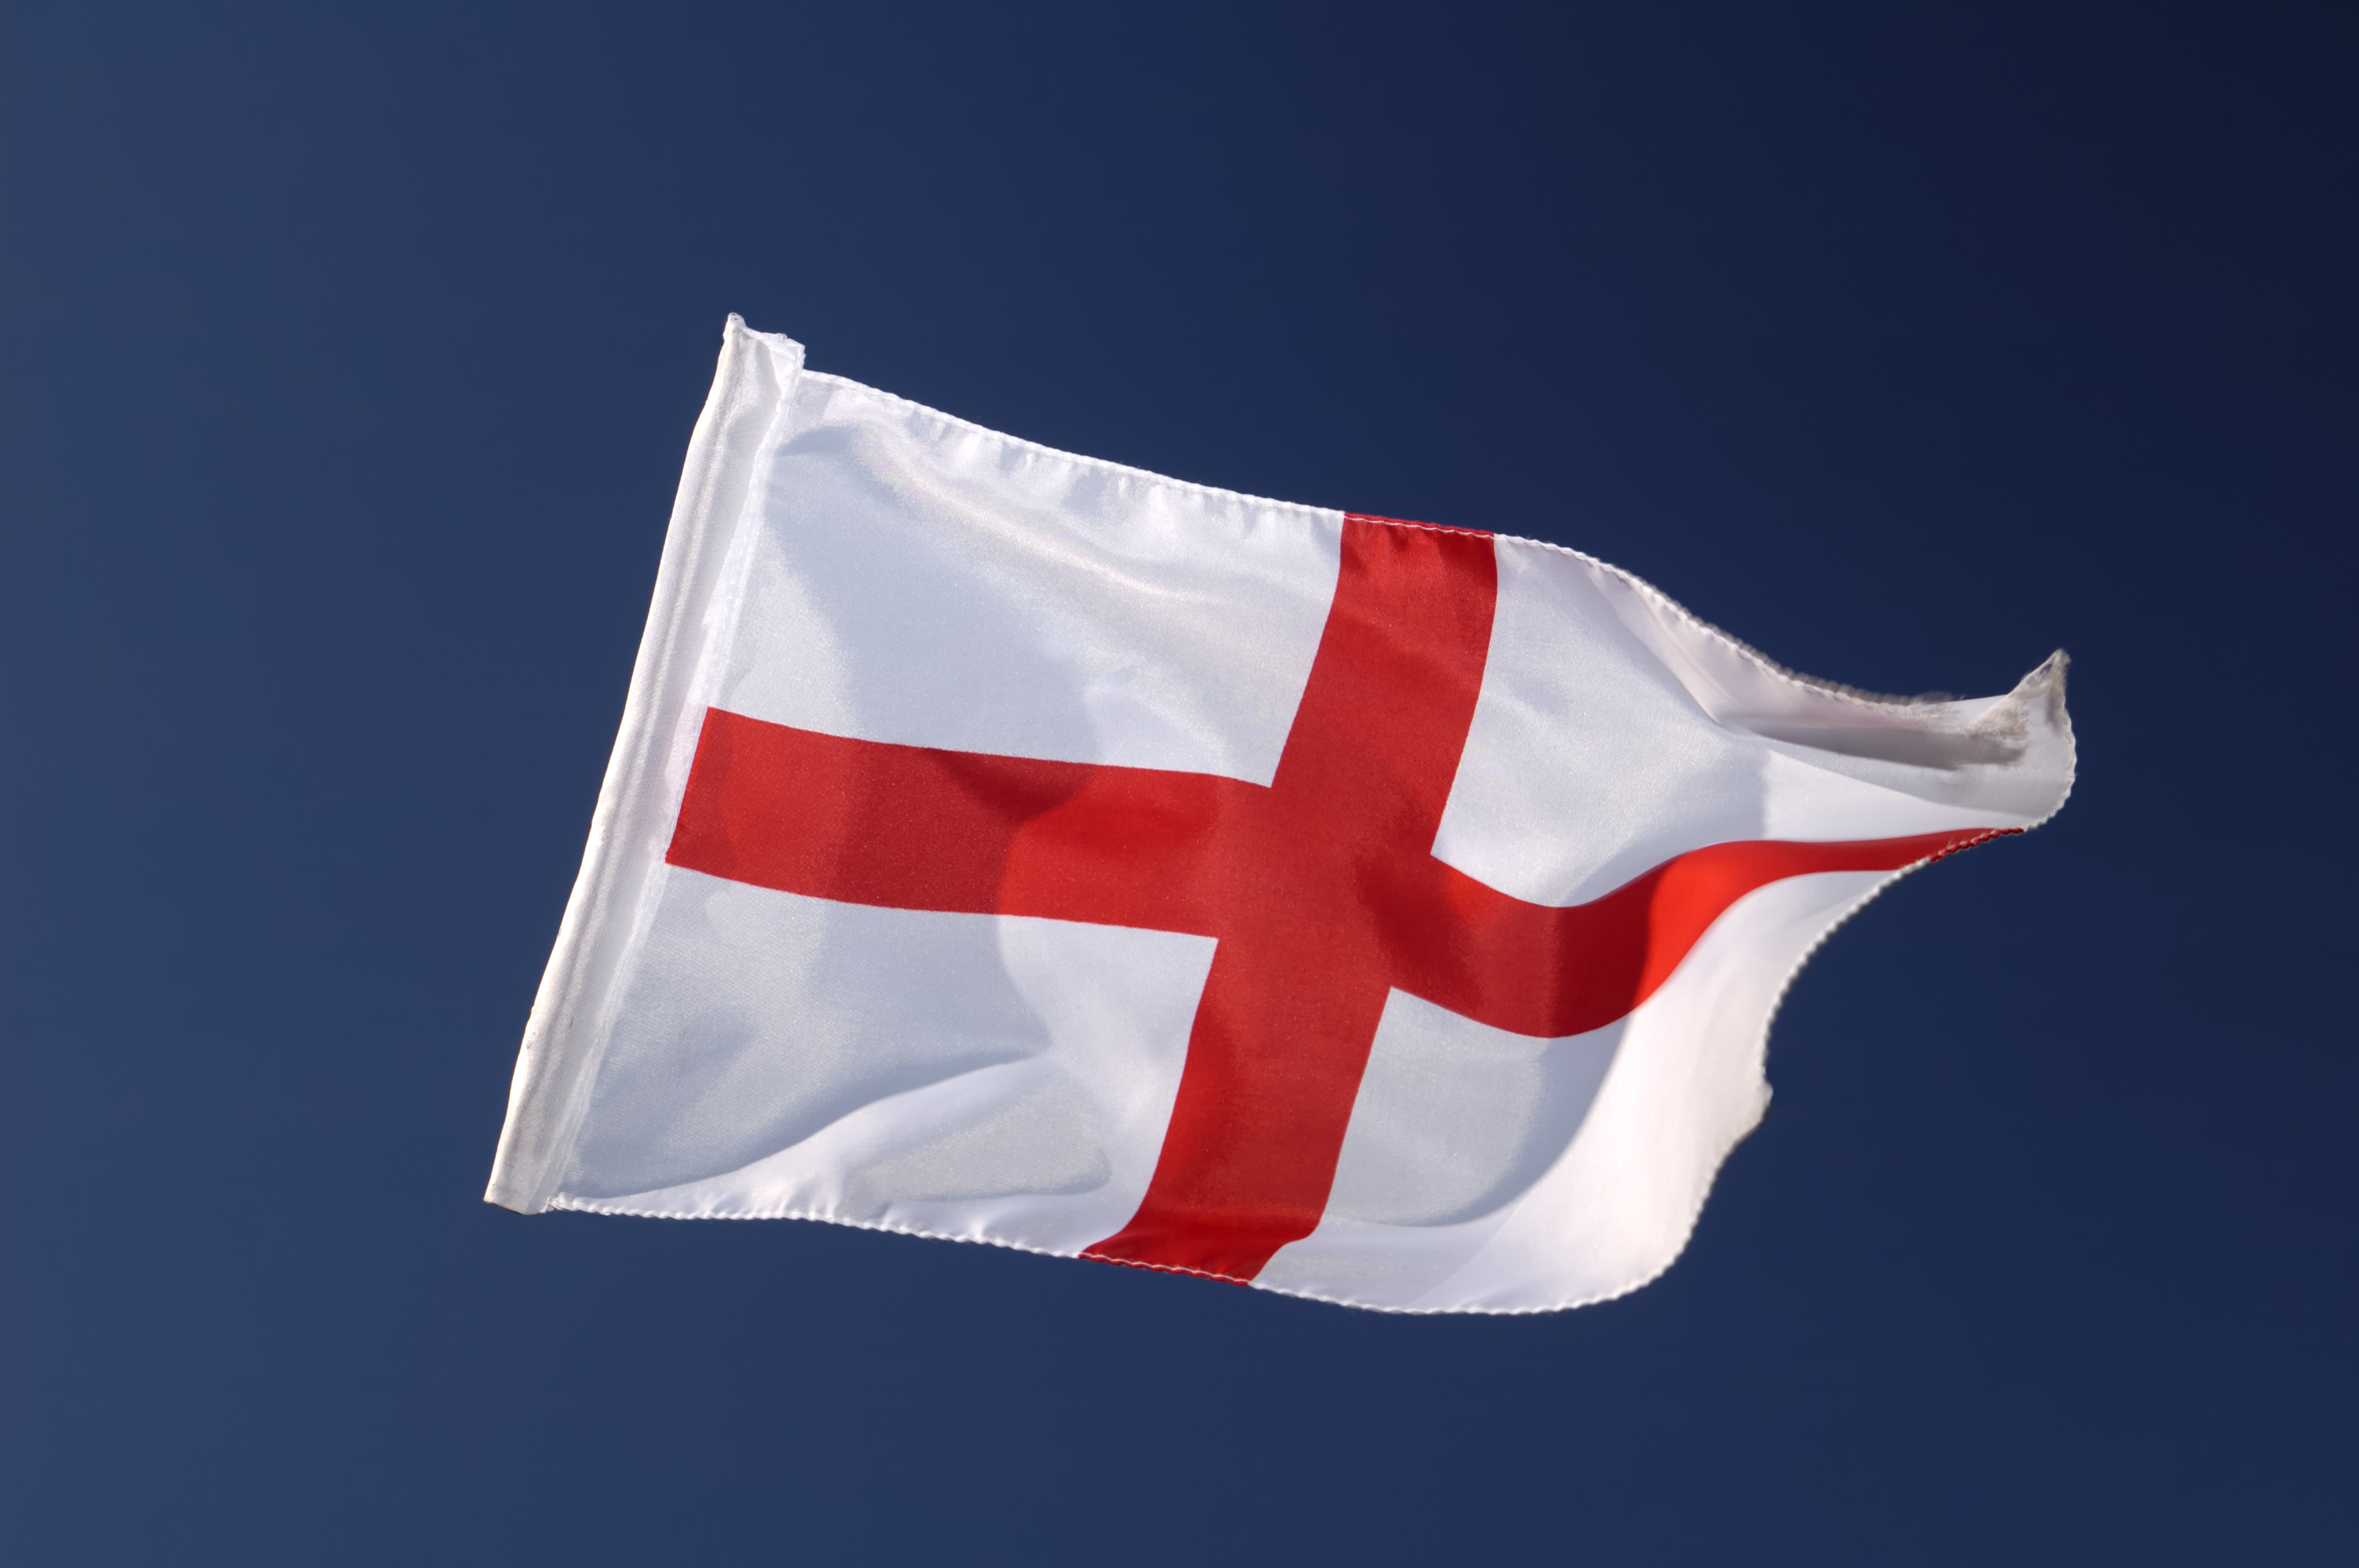 The cross of St George, the flag of England.